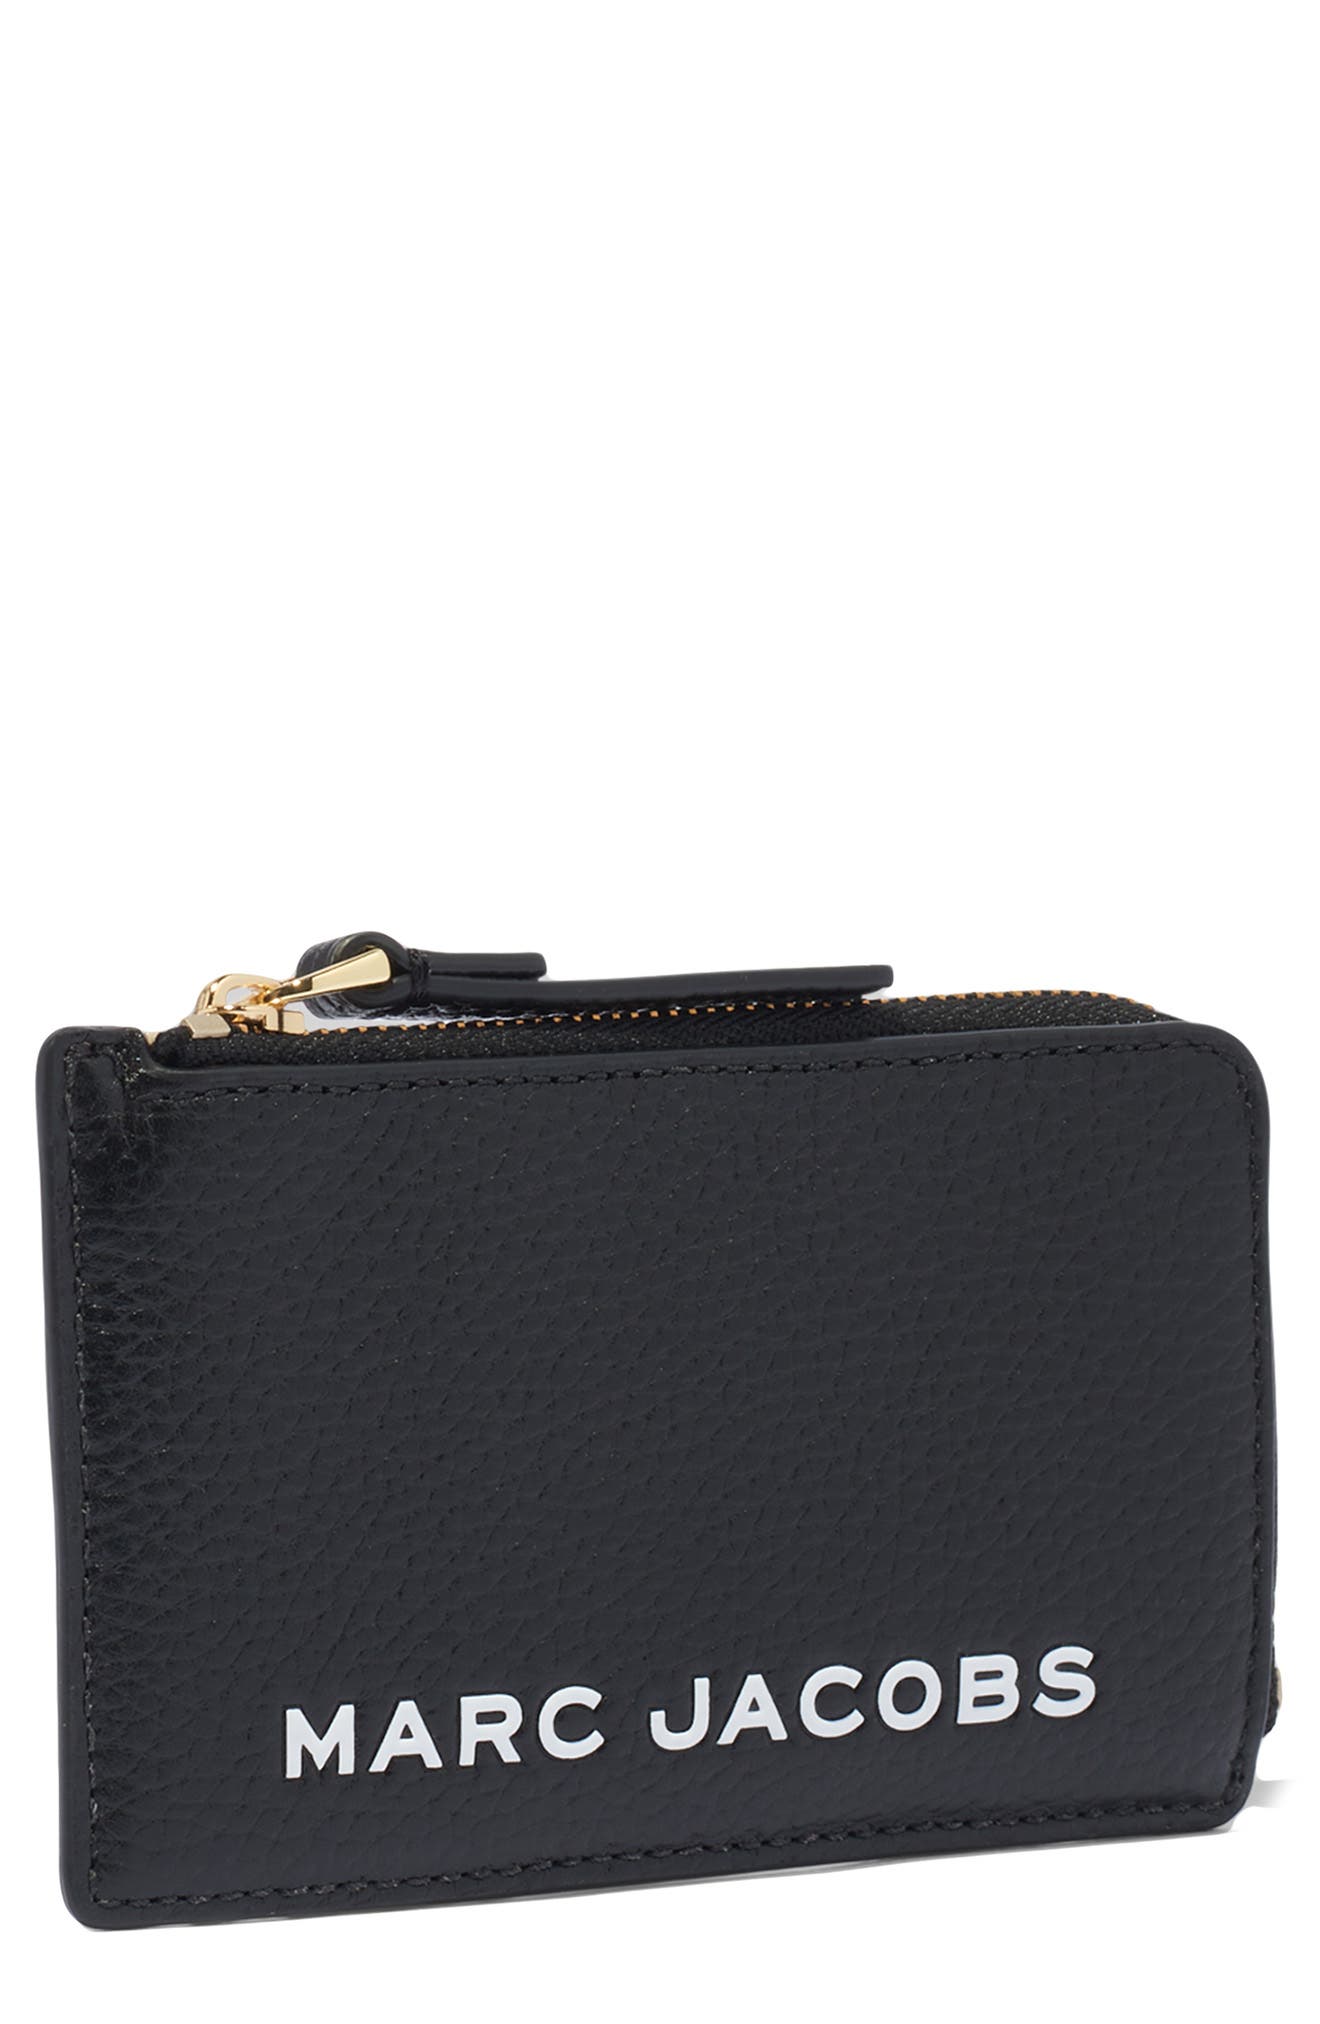 Marc Jacobs Logo Leather Zip Wallet in New Black at Nordstrom